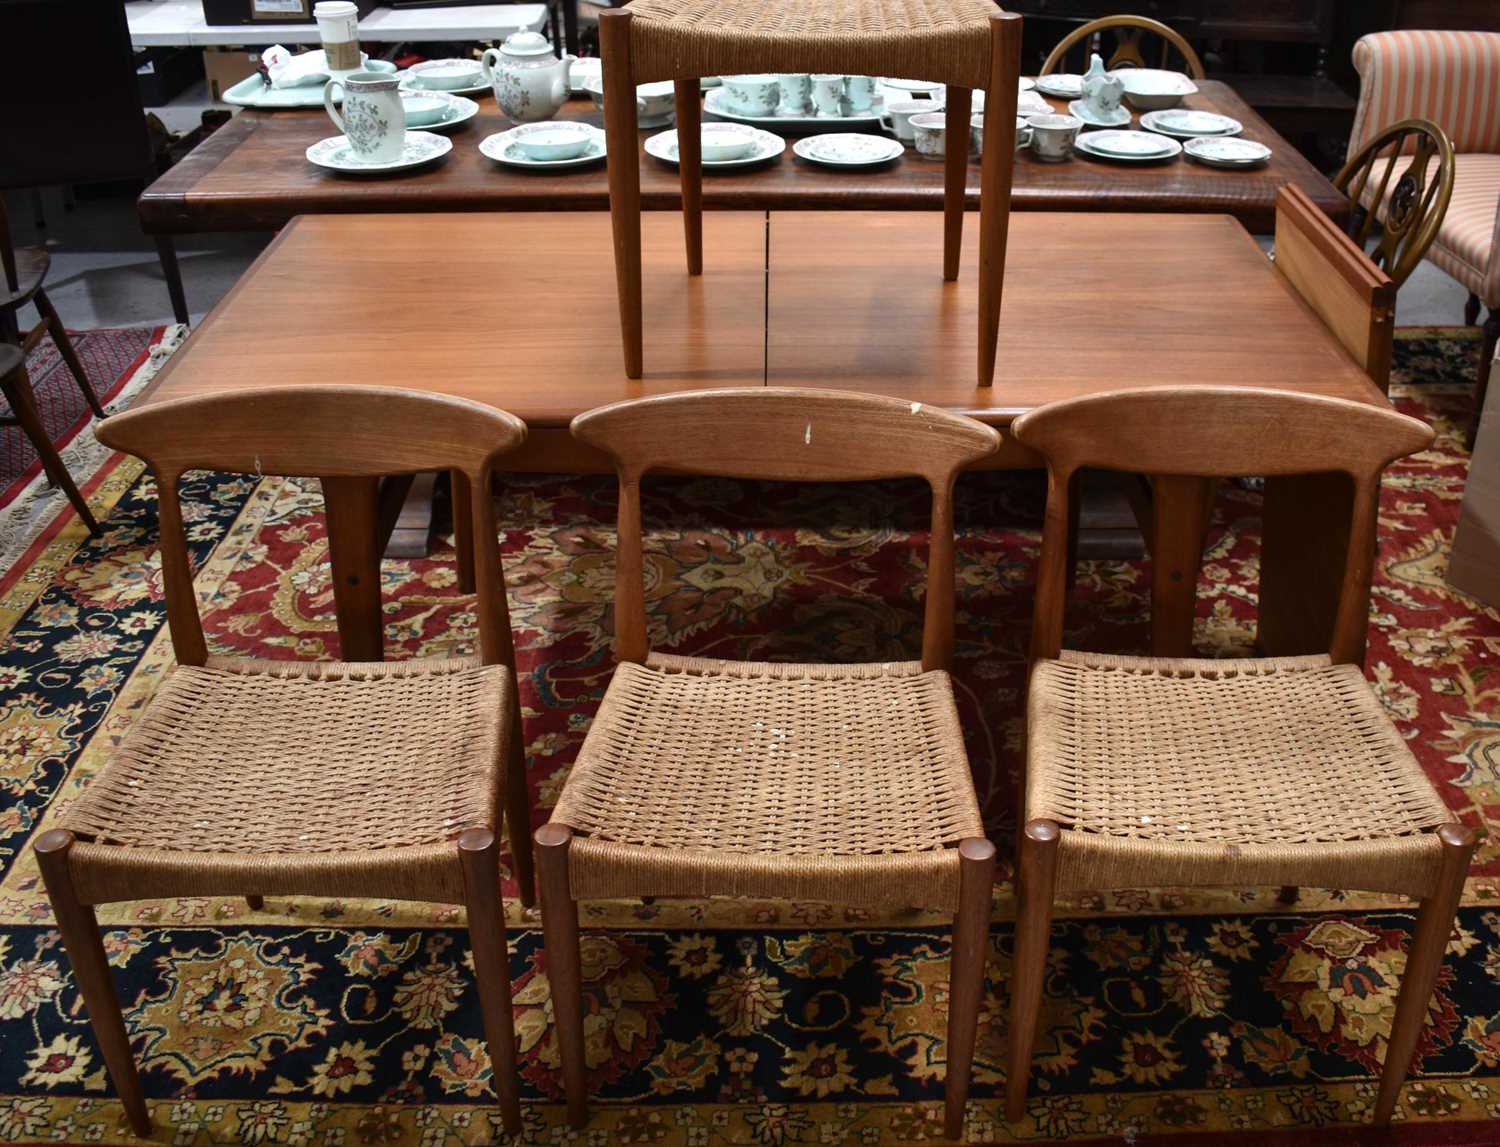 A set of three Mid-Century Danish Morgen- Kohl dining chairs and a stool which has been cut down